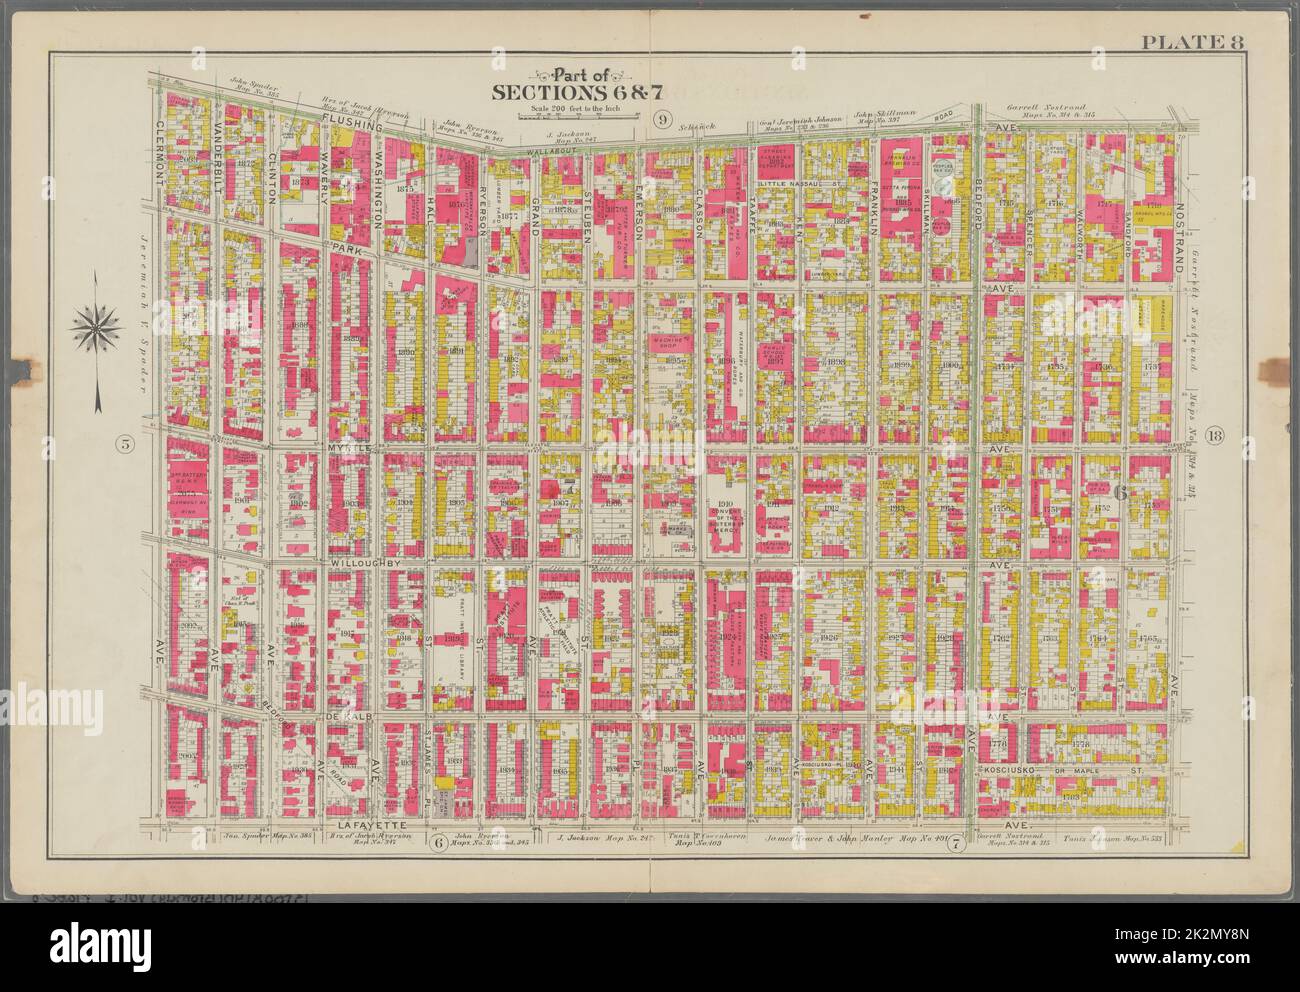 Bromley, George Washington. Cartographic, Maps, Atlases, land surveys. 1908. Lionel Pincus and Princess Firyal Map Division. Brooklyn (New York, N.Y.) , Maps Plate 8: Bounded by Flushing Avenue, Nostrand Avenue, Lafayette Avenue and Cromwell Avenue Plate 8 Stock Photo